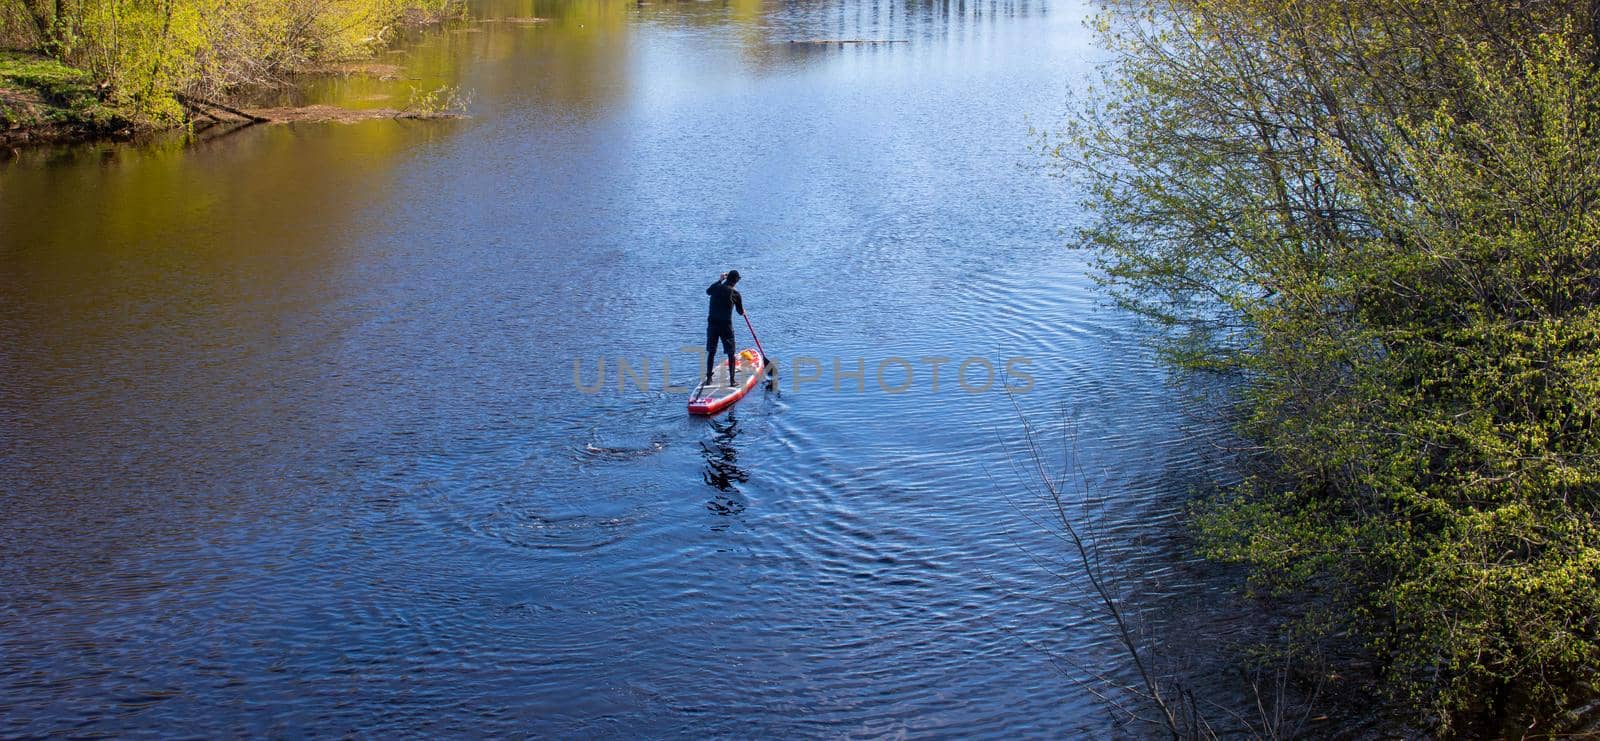 A man is floating on a paddle Board on the spring river. I can't see his face.